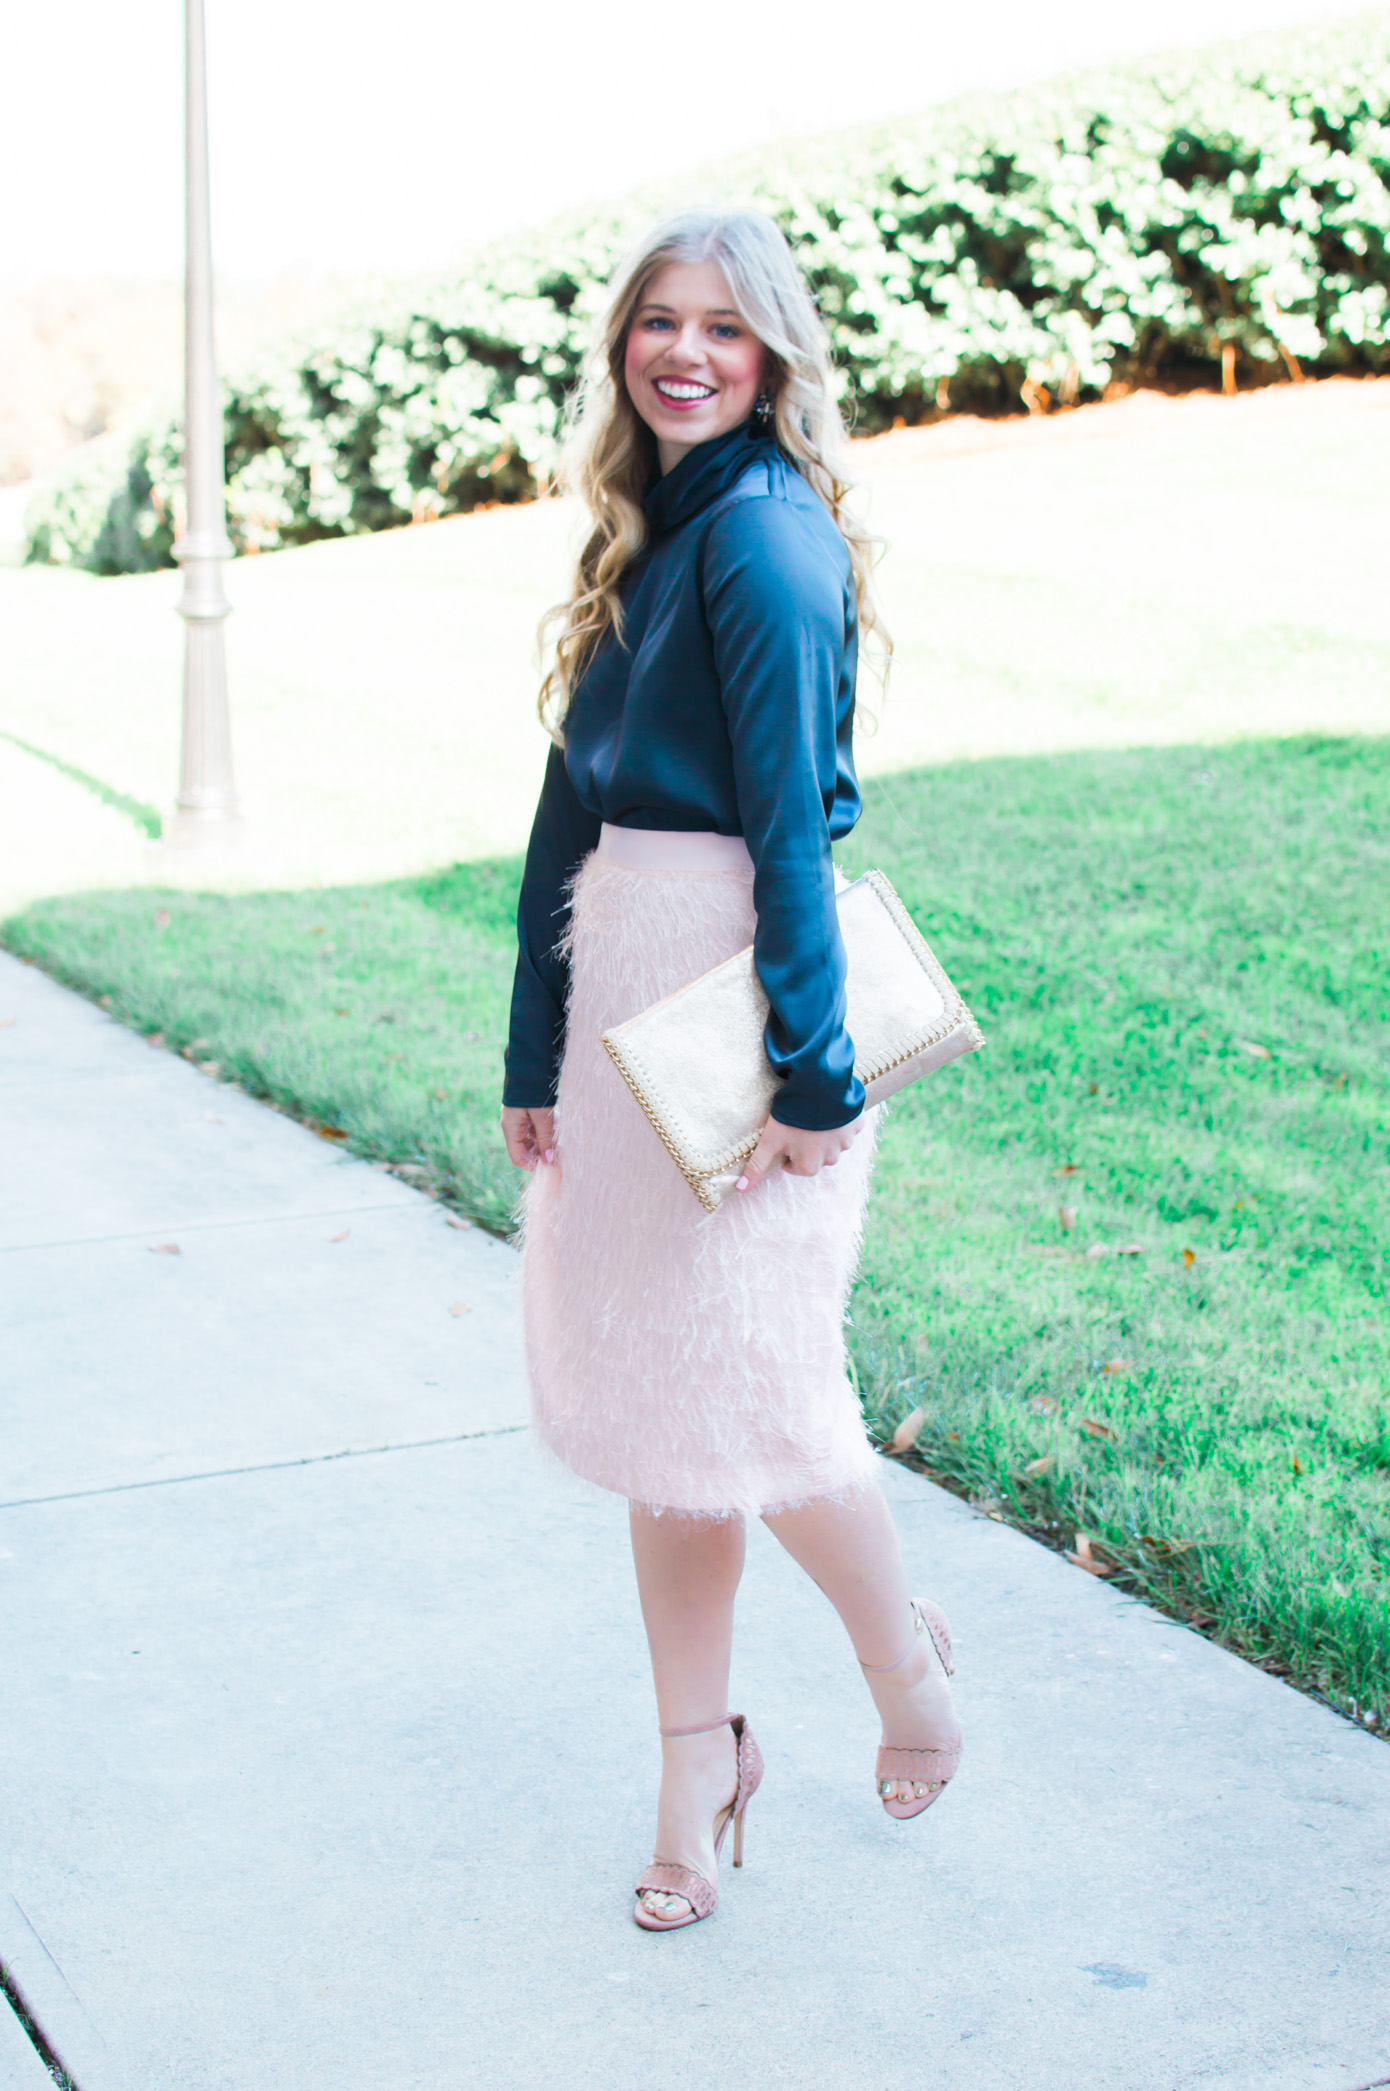 Holiday Fringe Pencil Skirt | Holiday Party Outfit Idea | Louella Reese Life & Style Blog